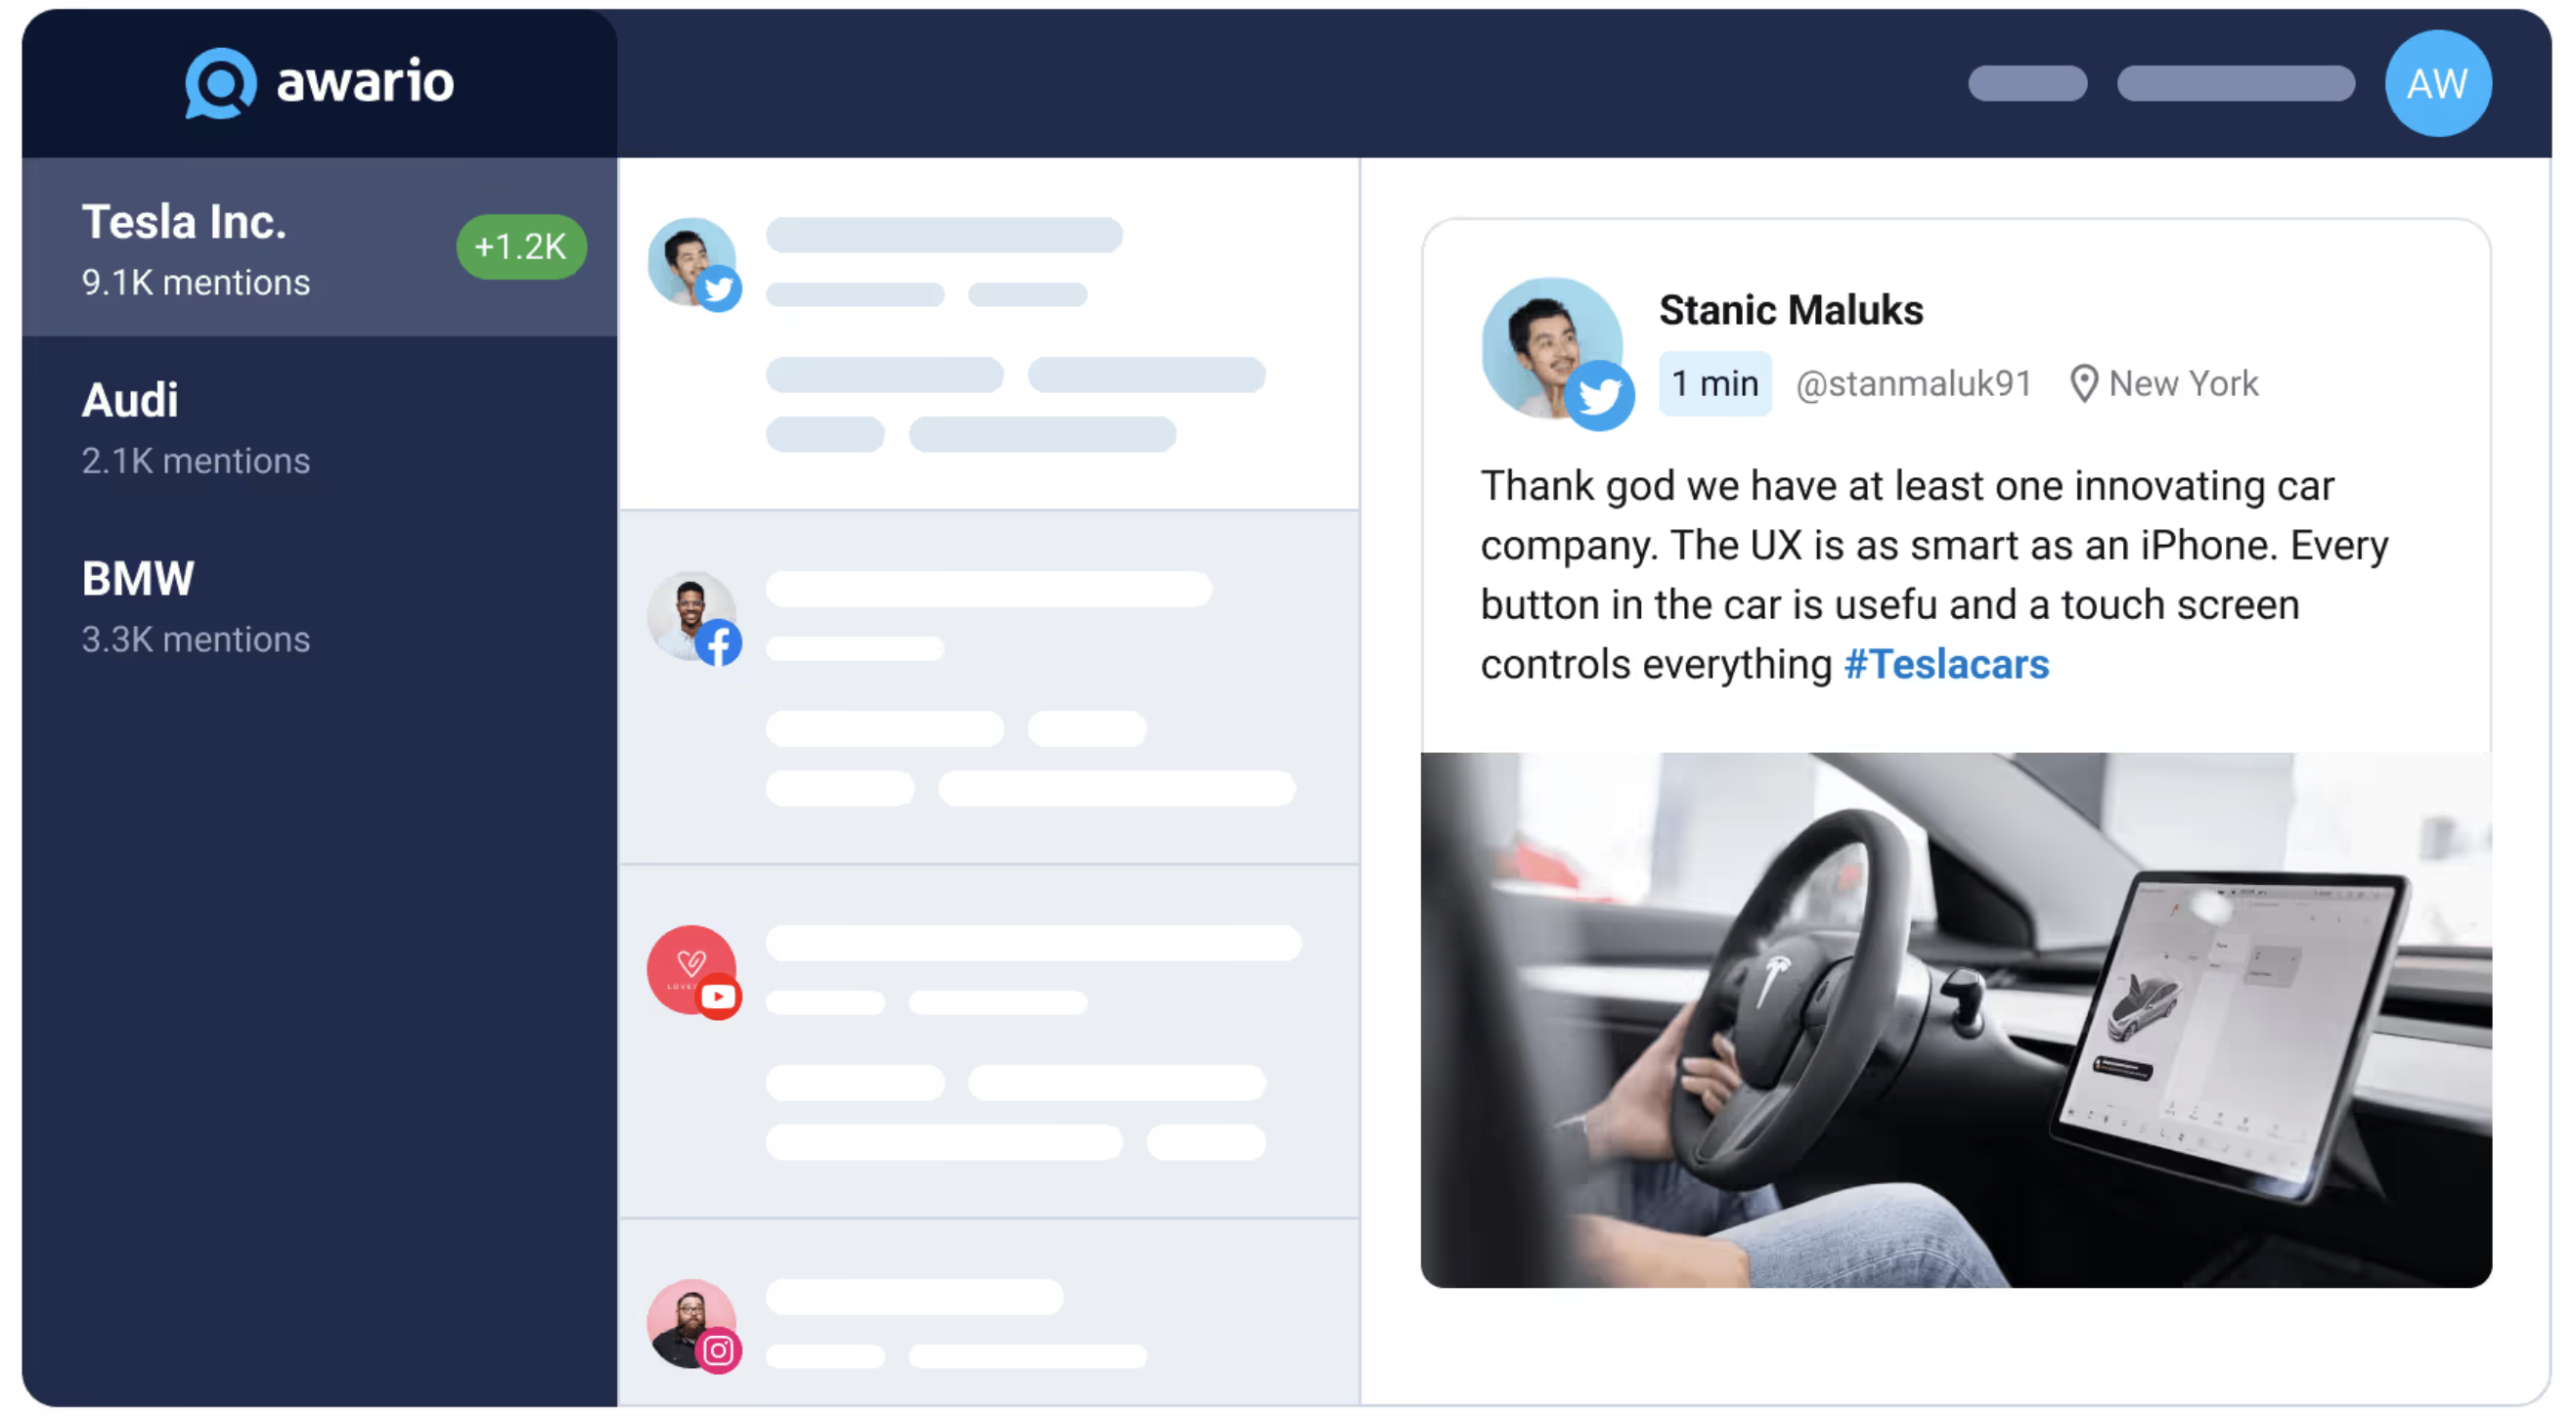 Screenshot of Awario's interface: on the left-hand side, the topics are around Tesla, Audi and BMW. The main dashboard is showing a feed of social posts around Tesla.